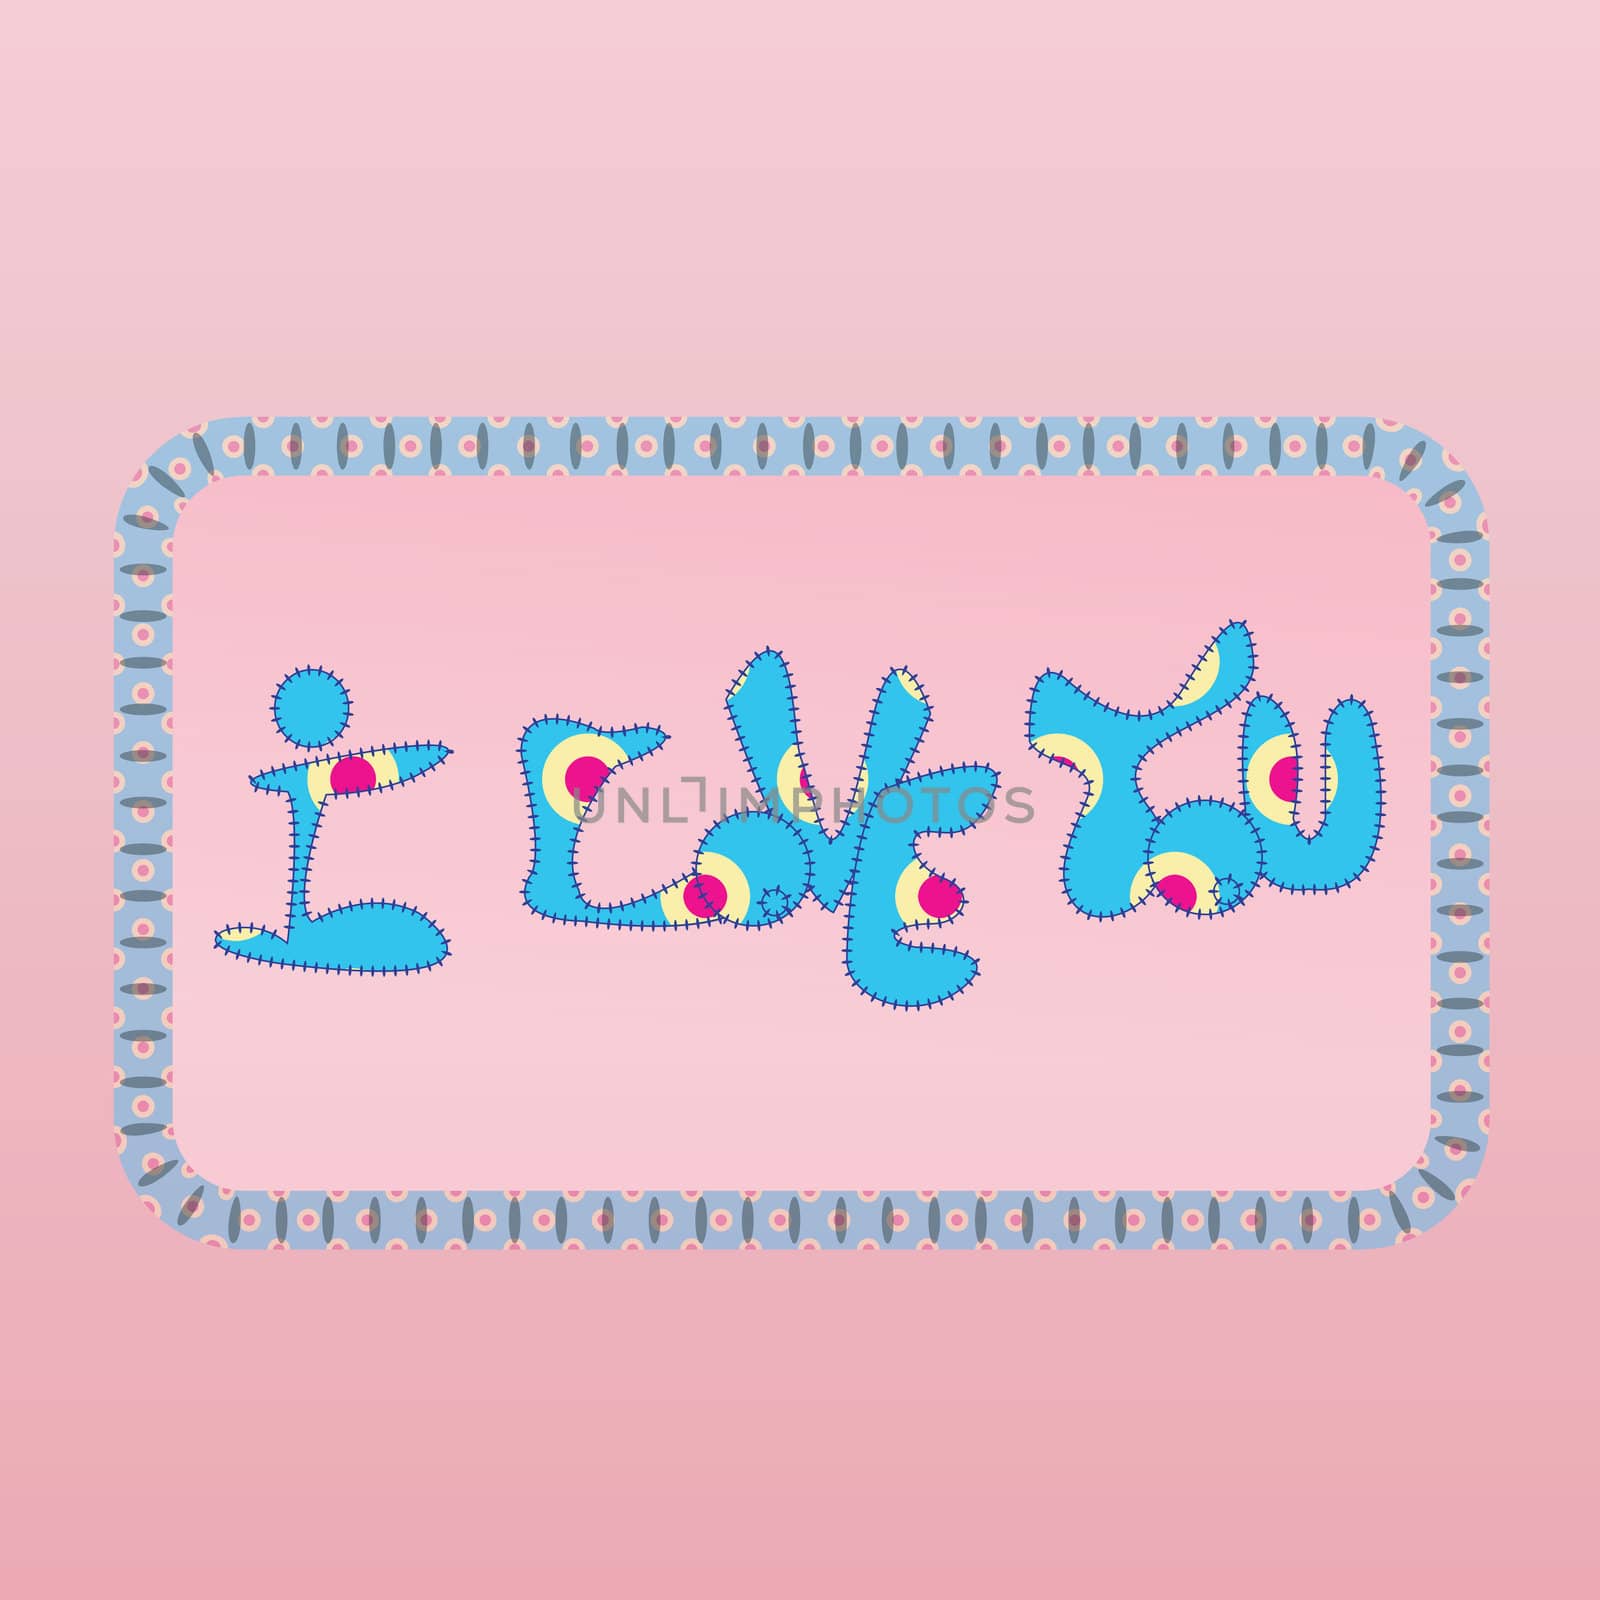 "I love you" note illustration in pink